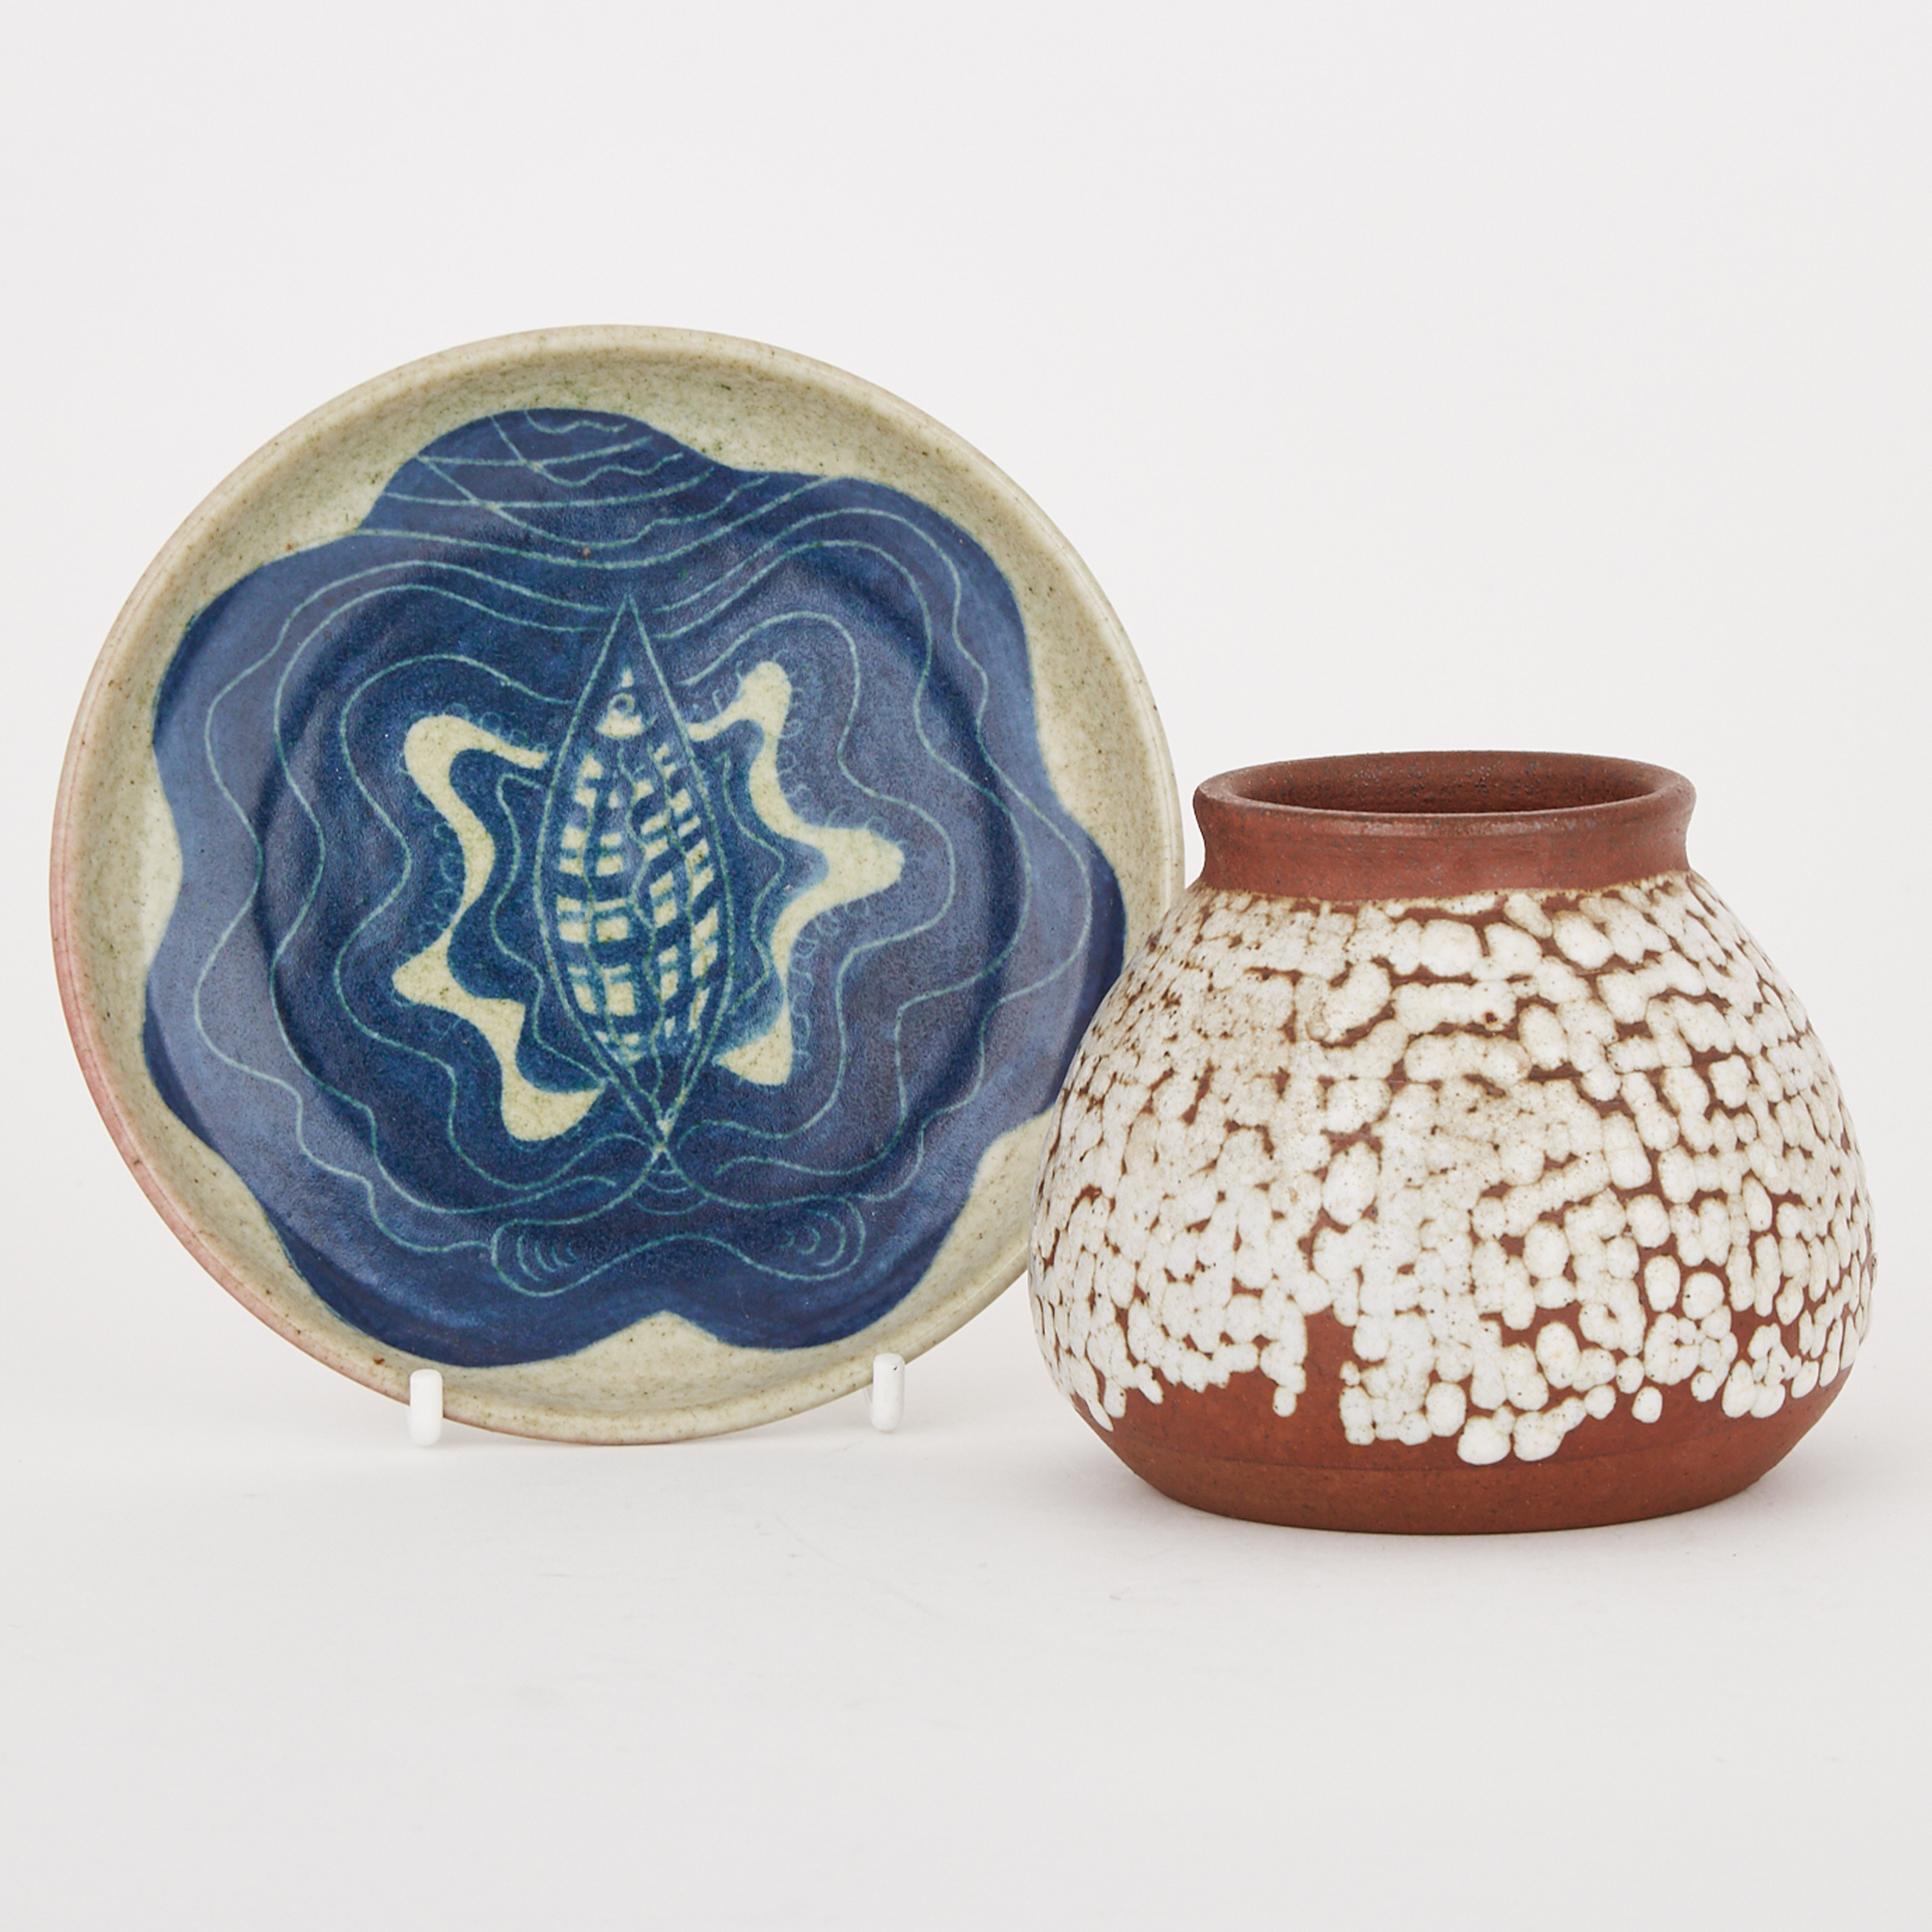 Deichmann Small Plate and Vase, mid-20th century